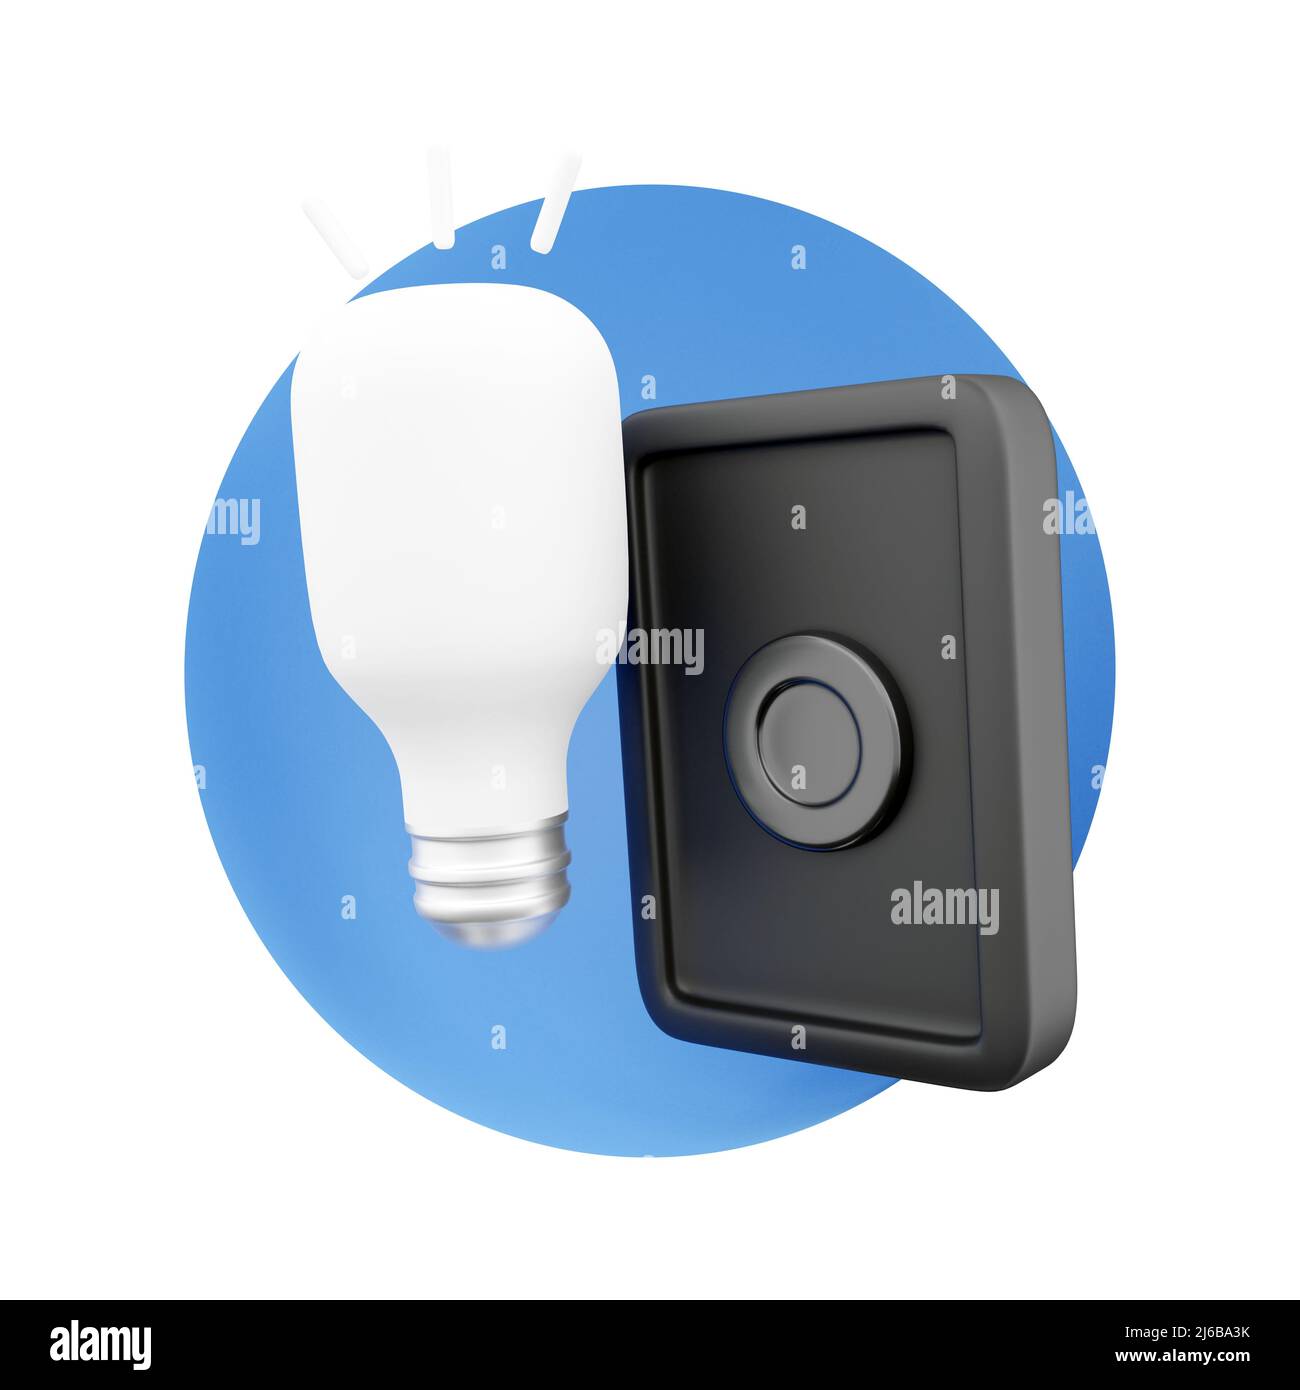 Infrared Remote Control Light Switch 